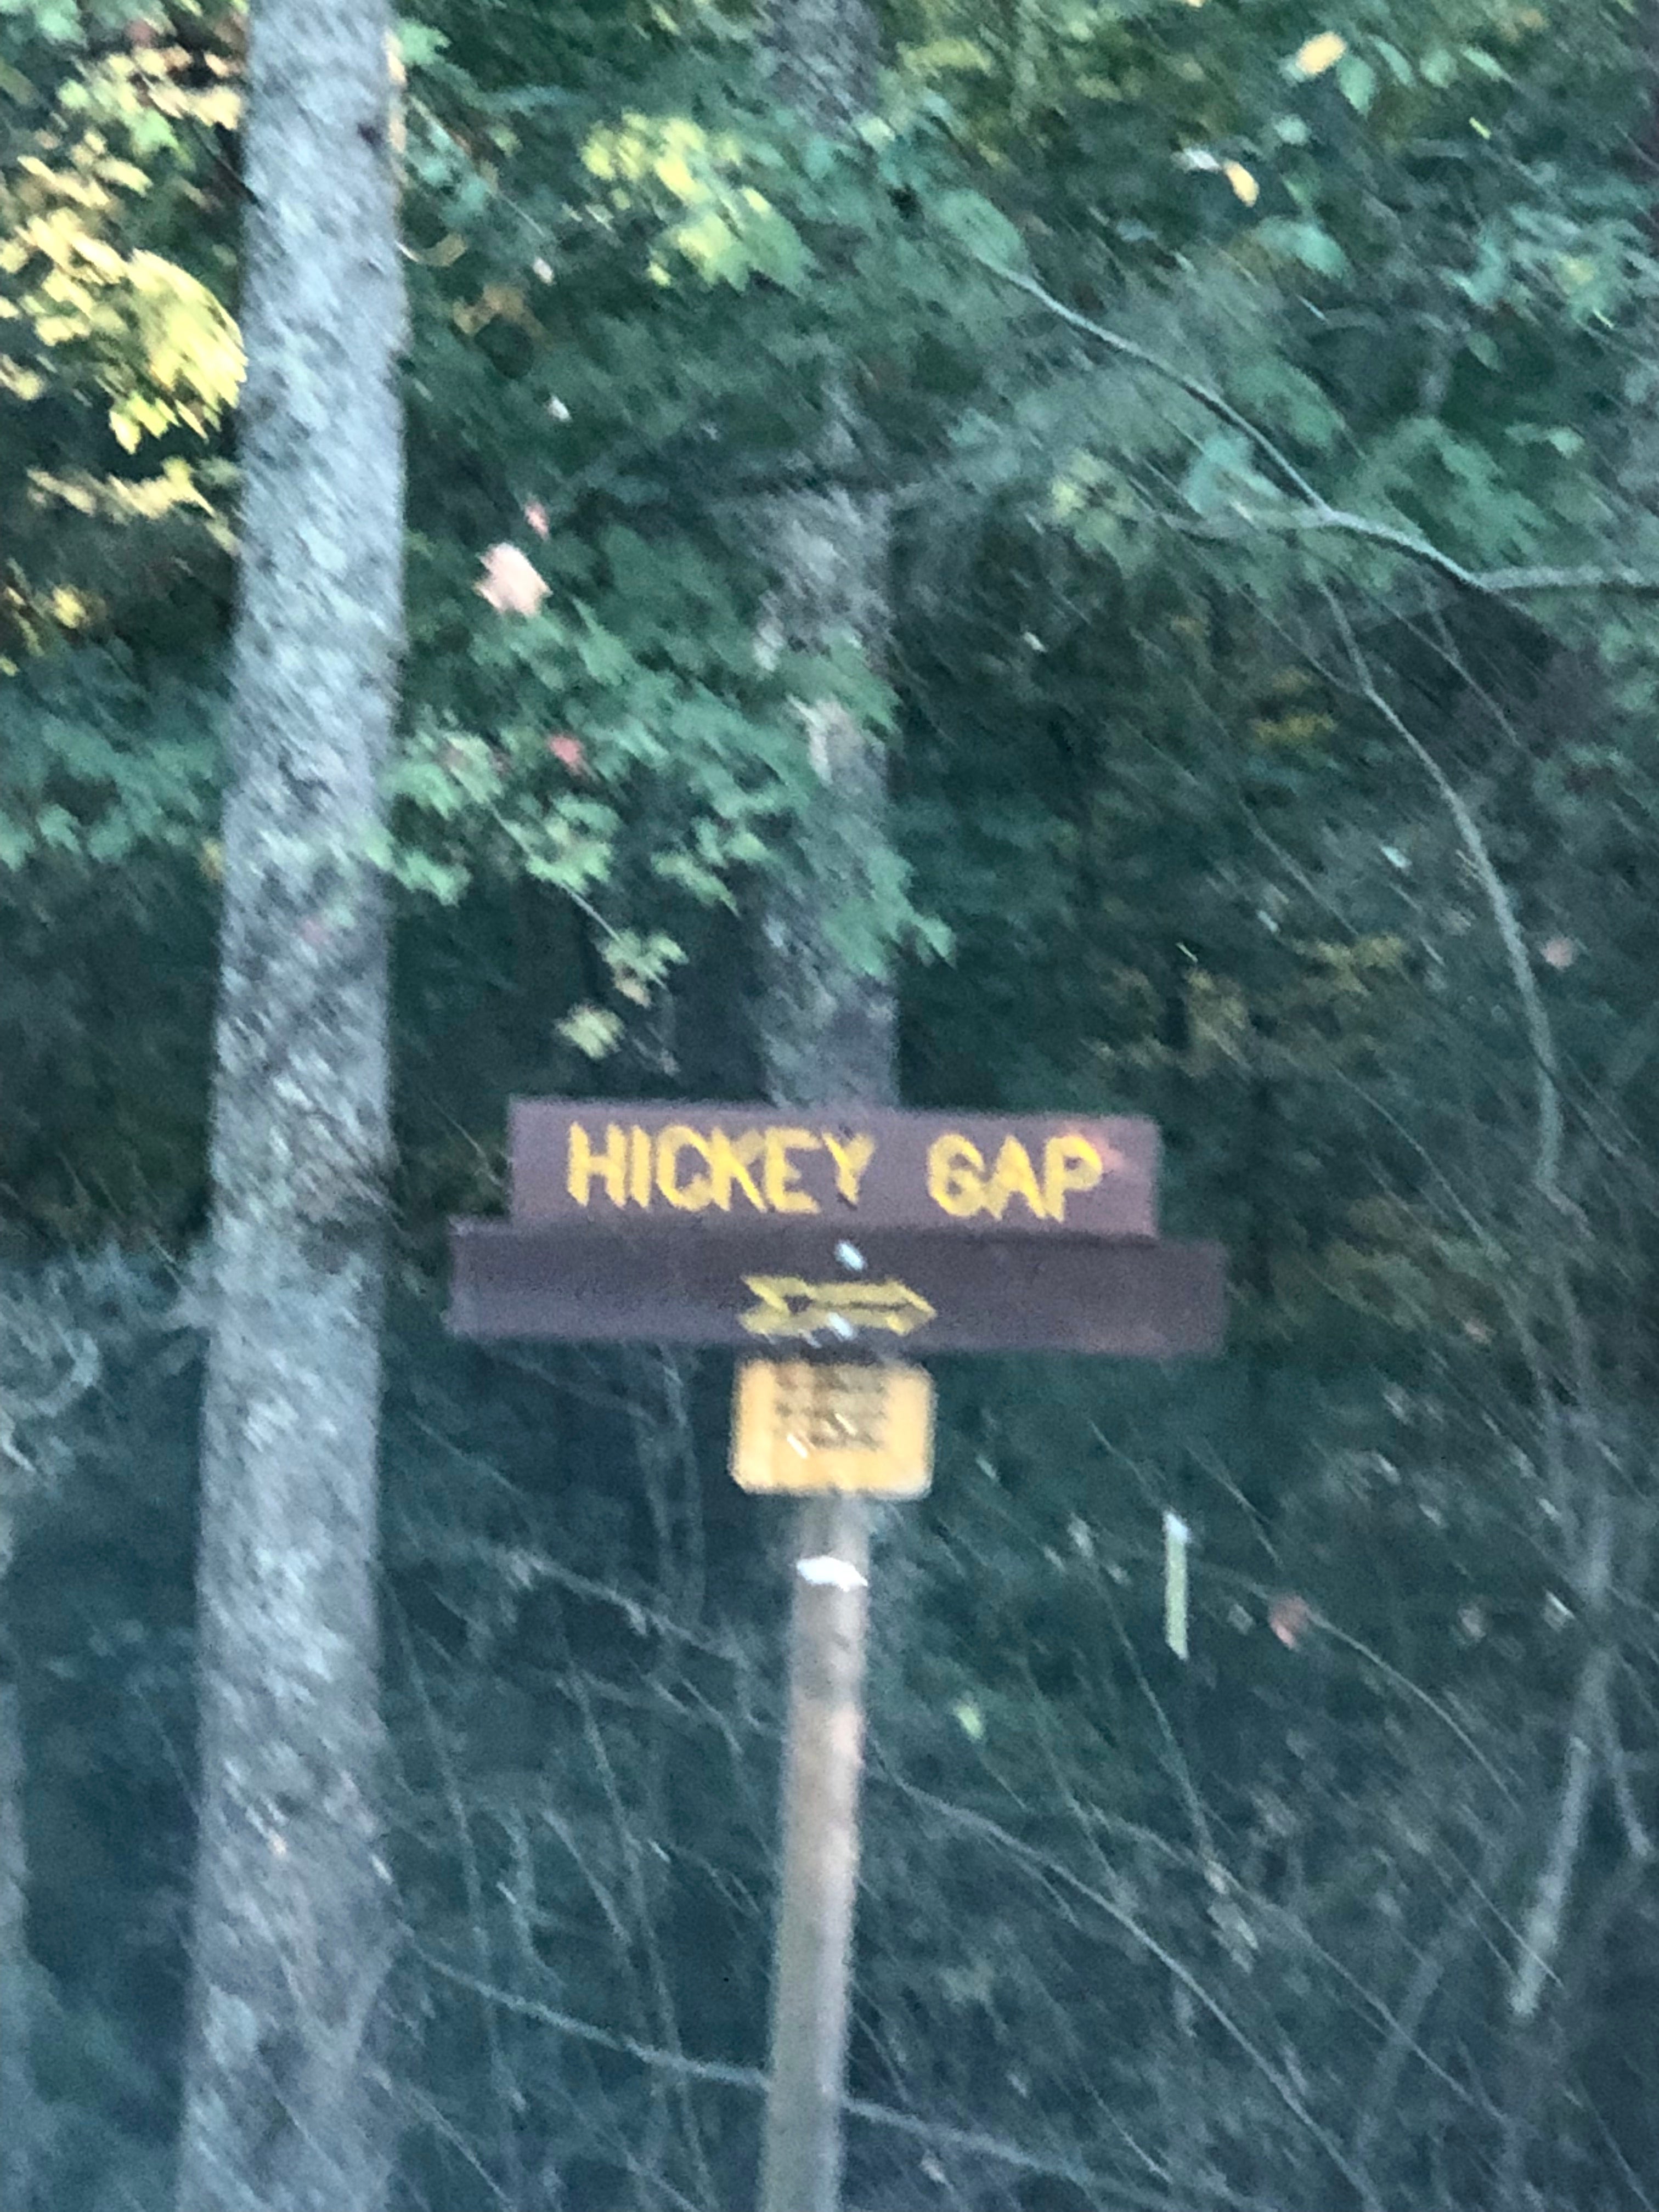 Hickey gap sign at the fork in the road